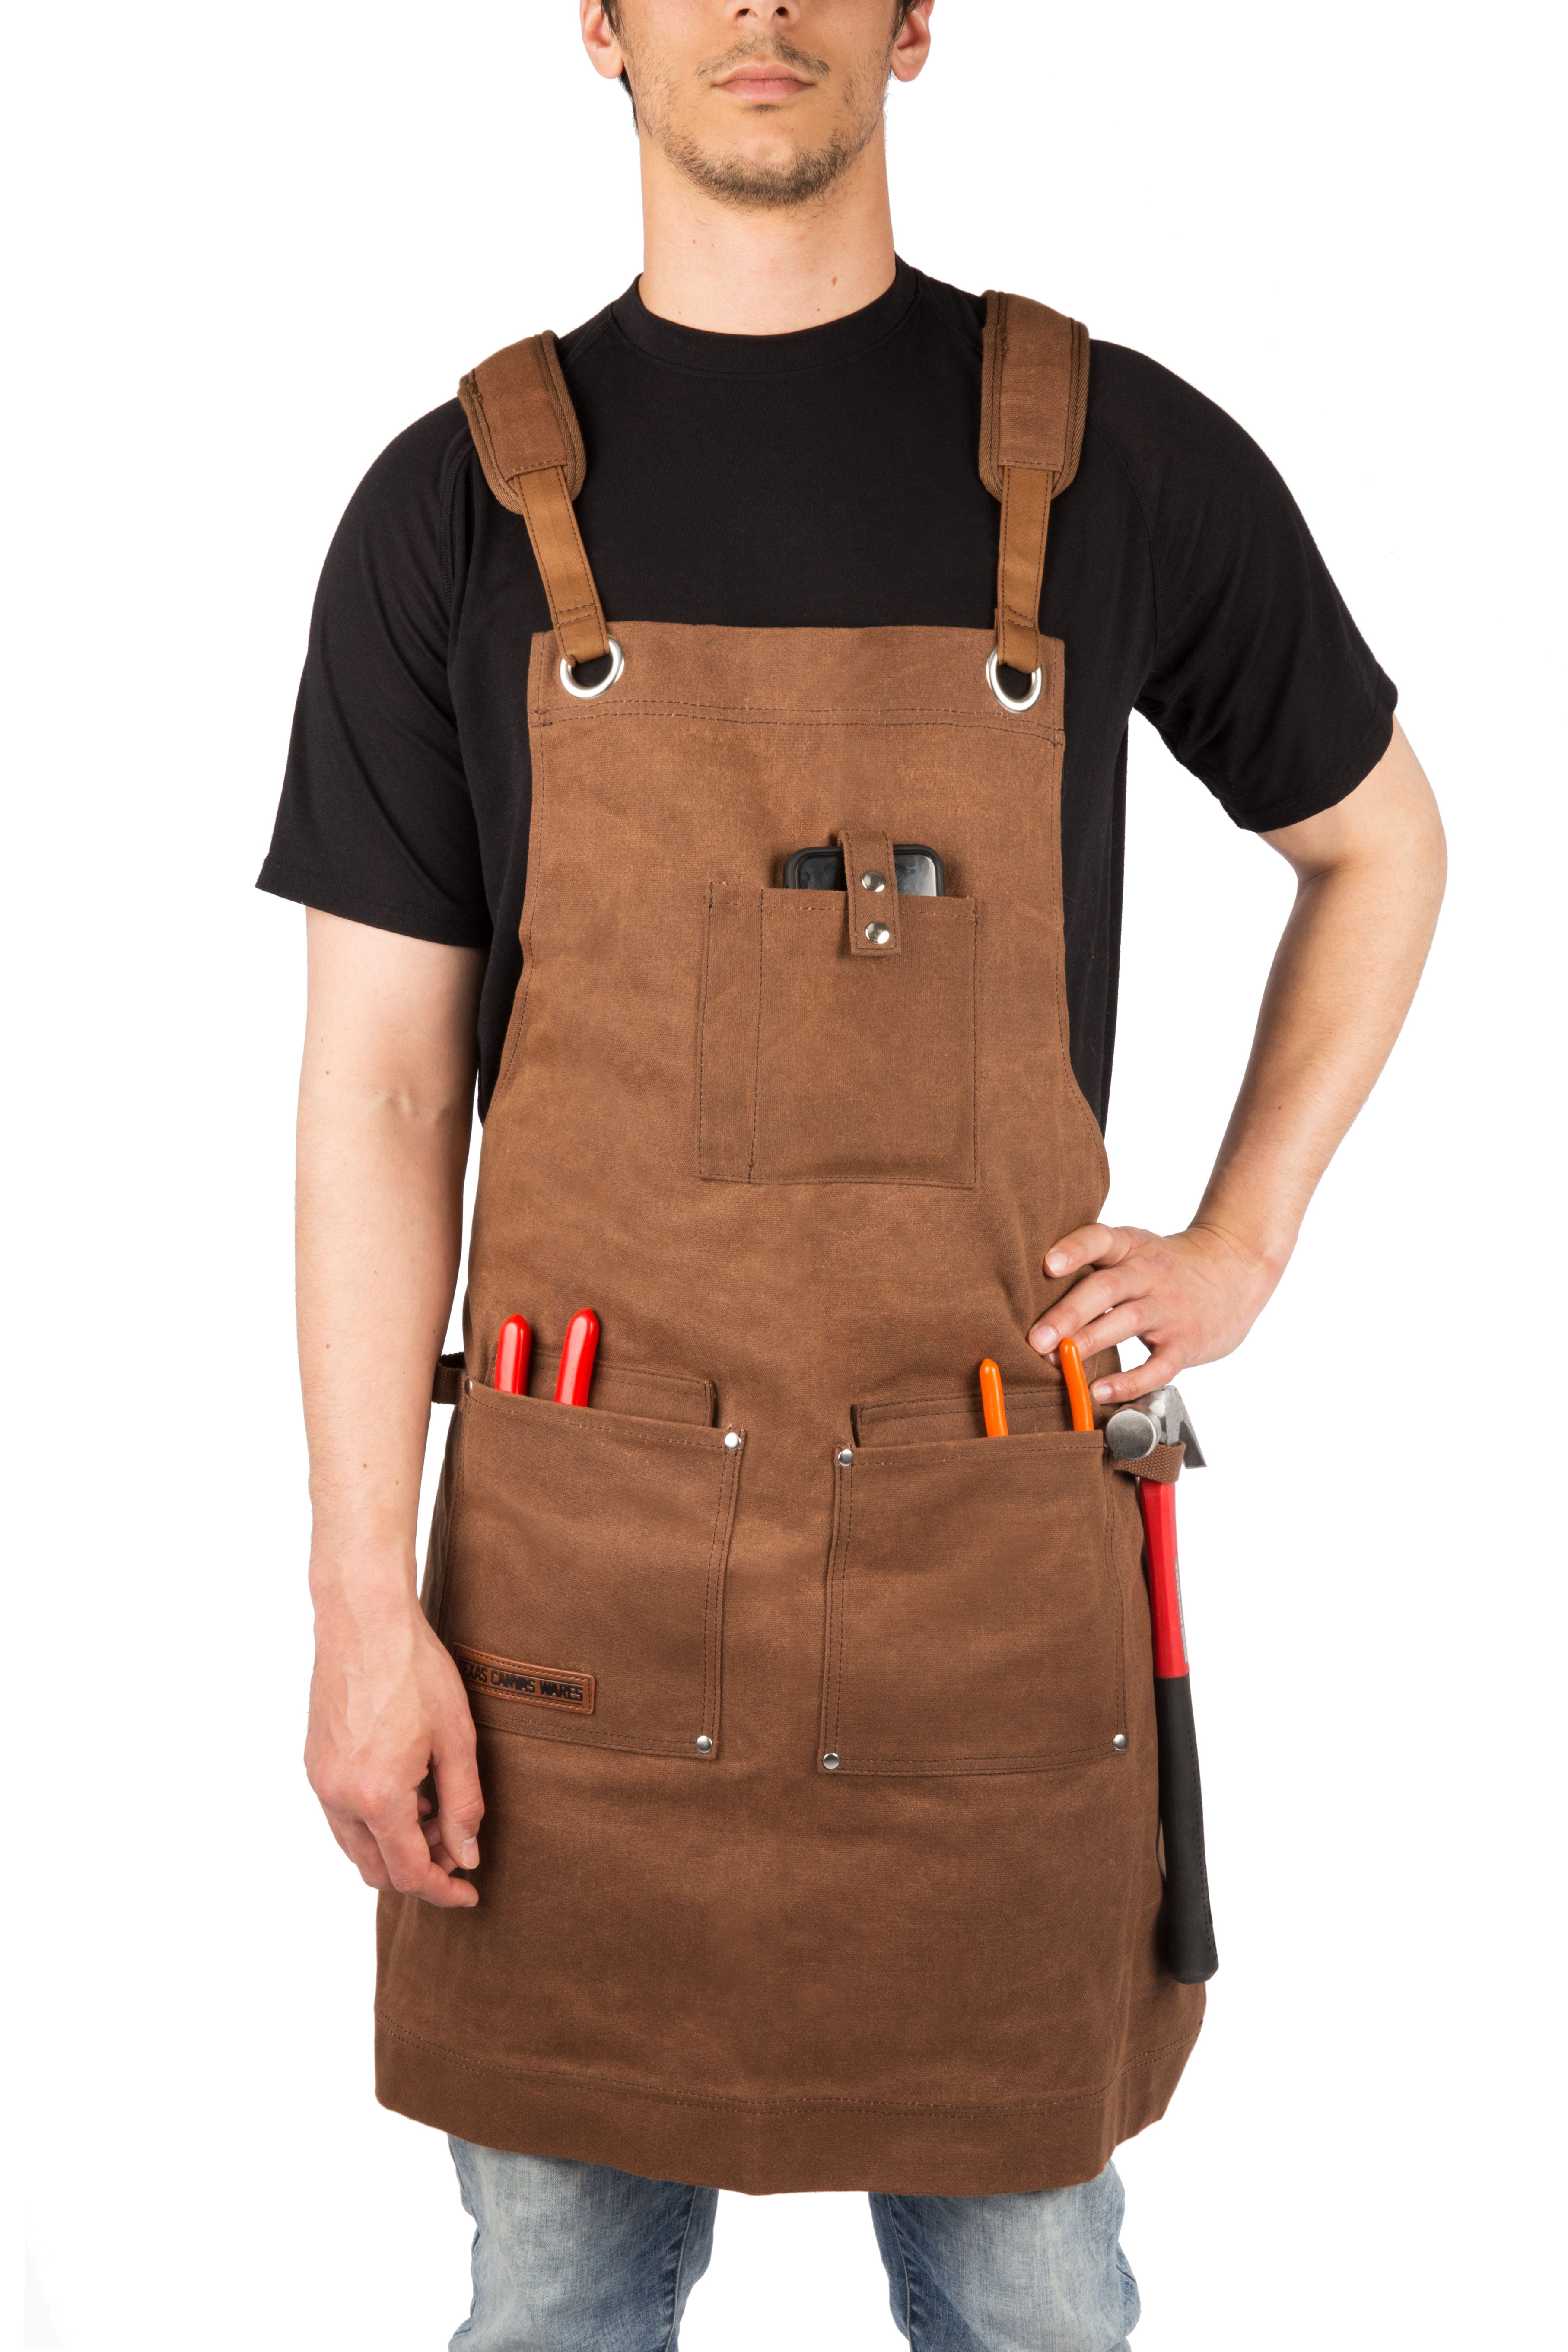 Heavy Duty Waxed Canvas Work Apron for Men and Women - Deluxe Edition  (Brown)